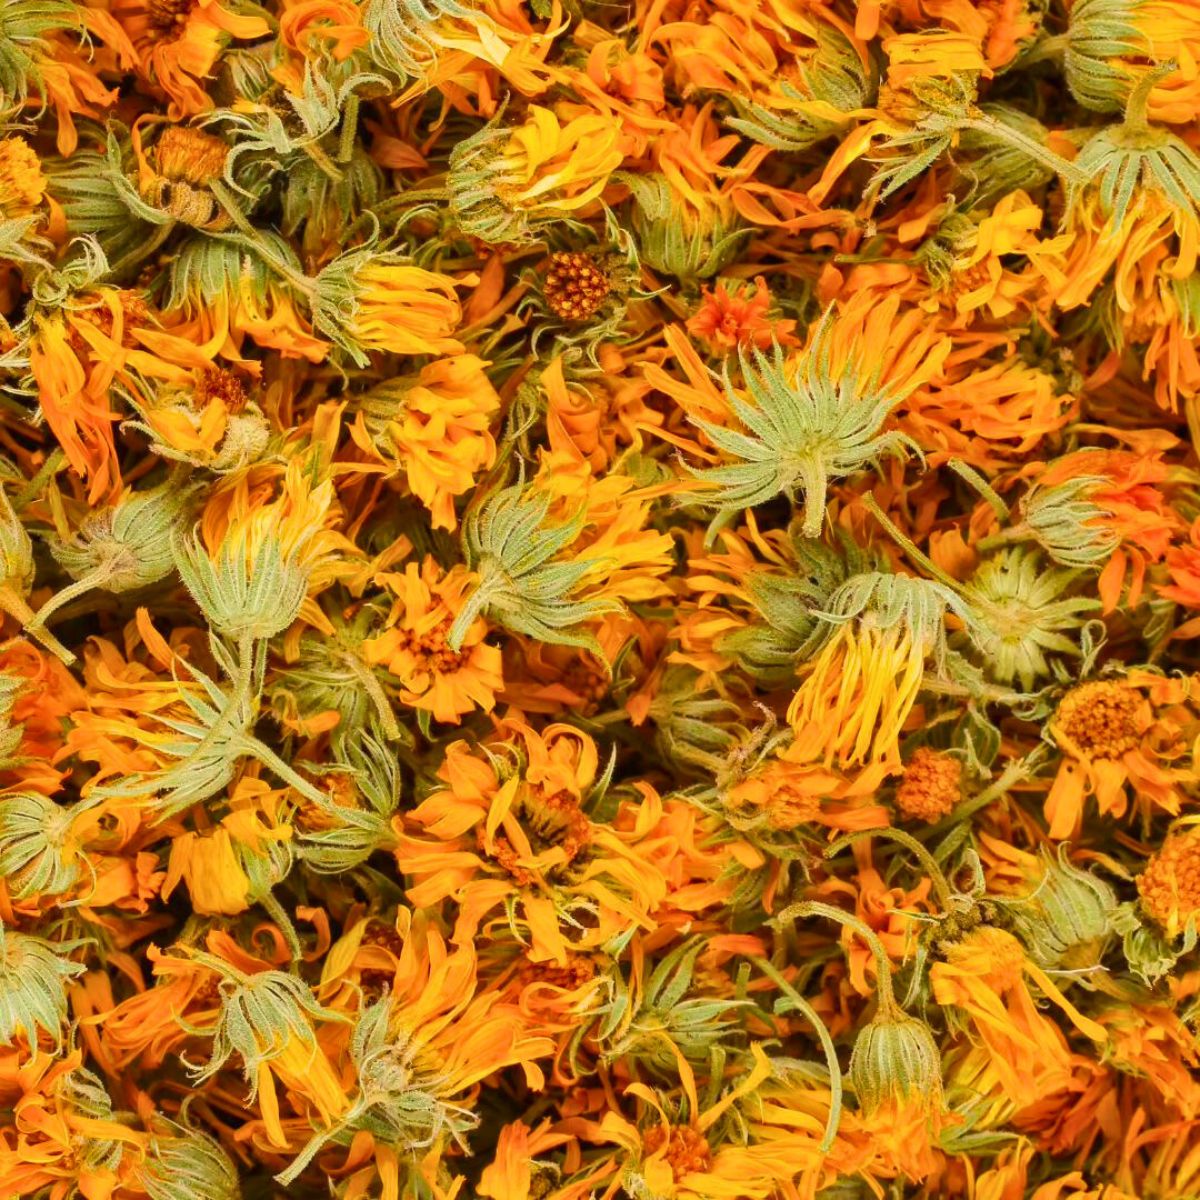 Calendula is one of the most healing flowering plants